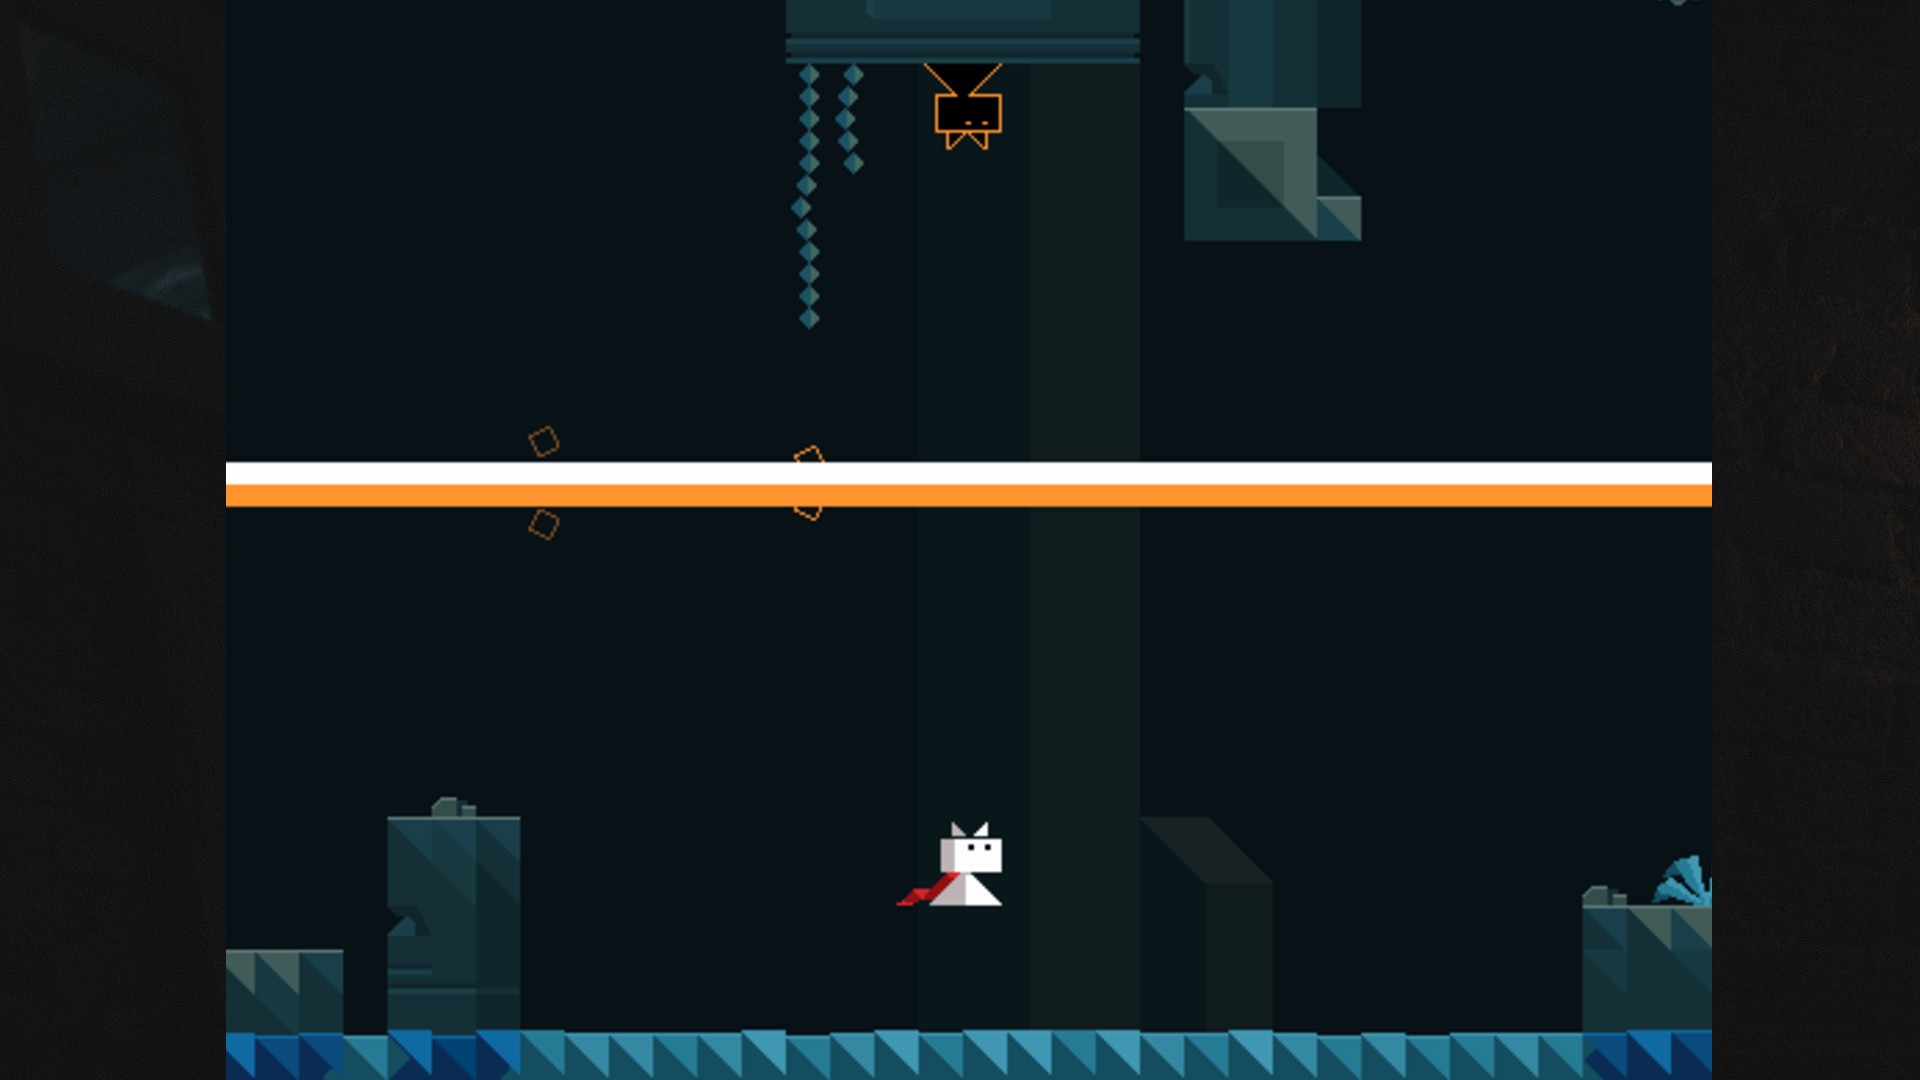 Online games: Ditto. Image shows a black and a white cat running through a pixelated world.,